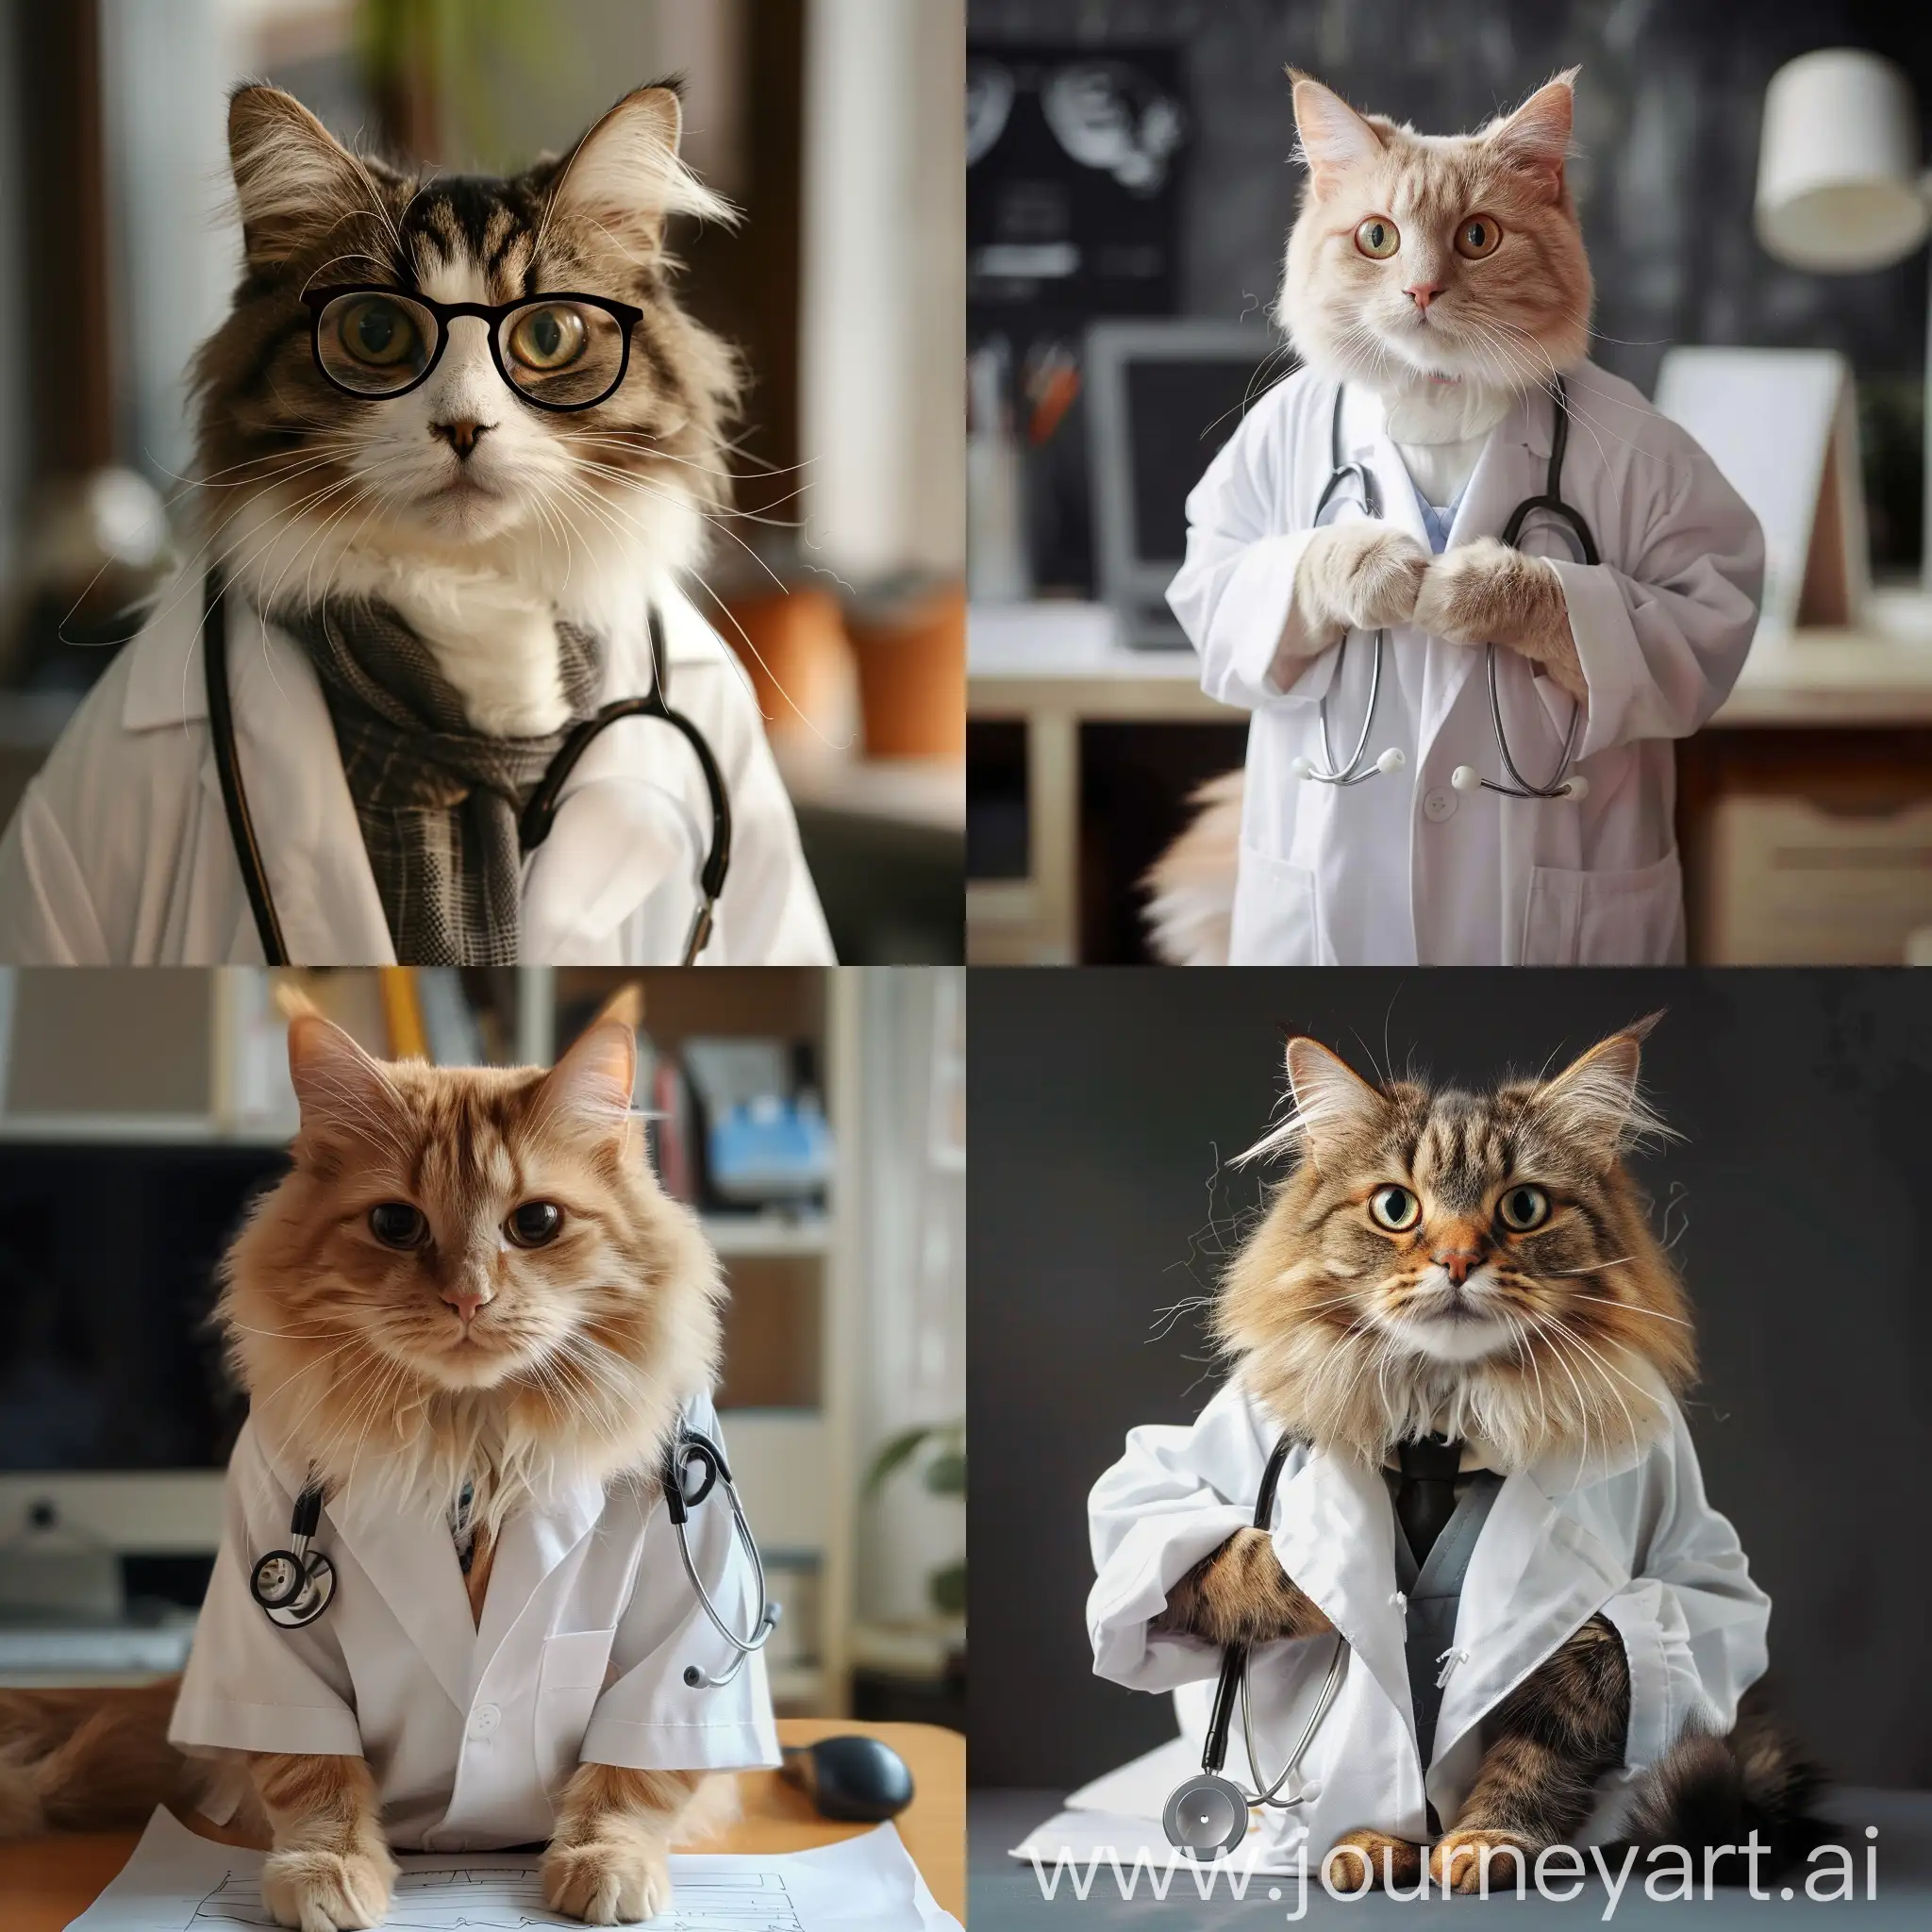 Cat as a doctor, funny image